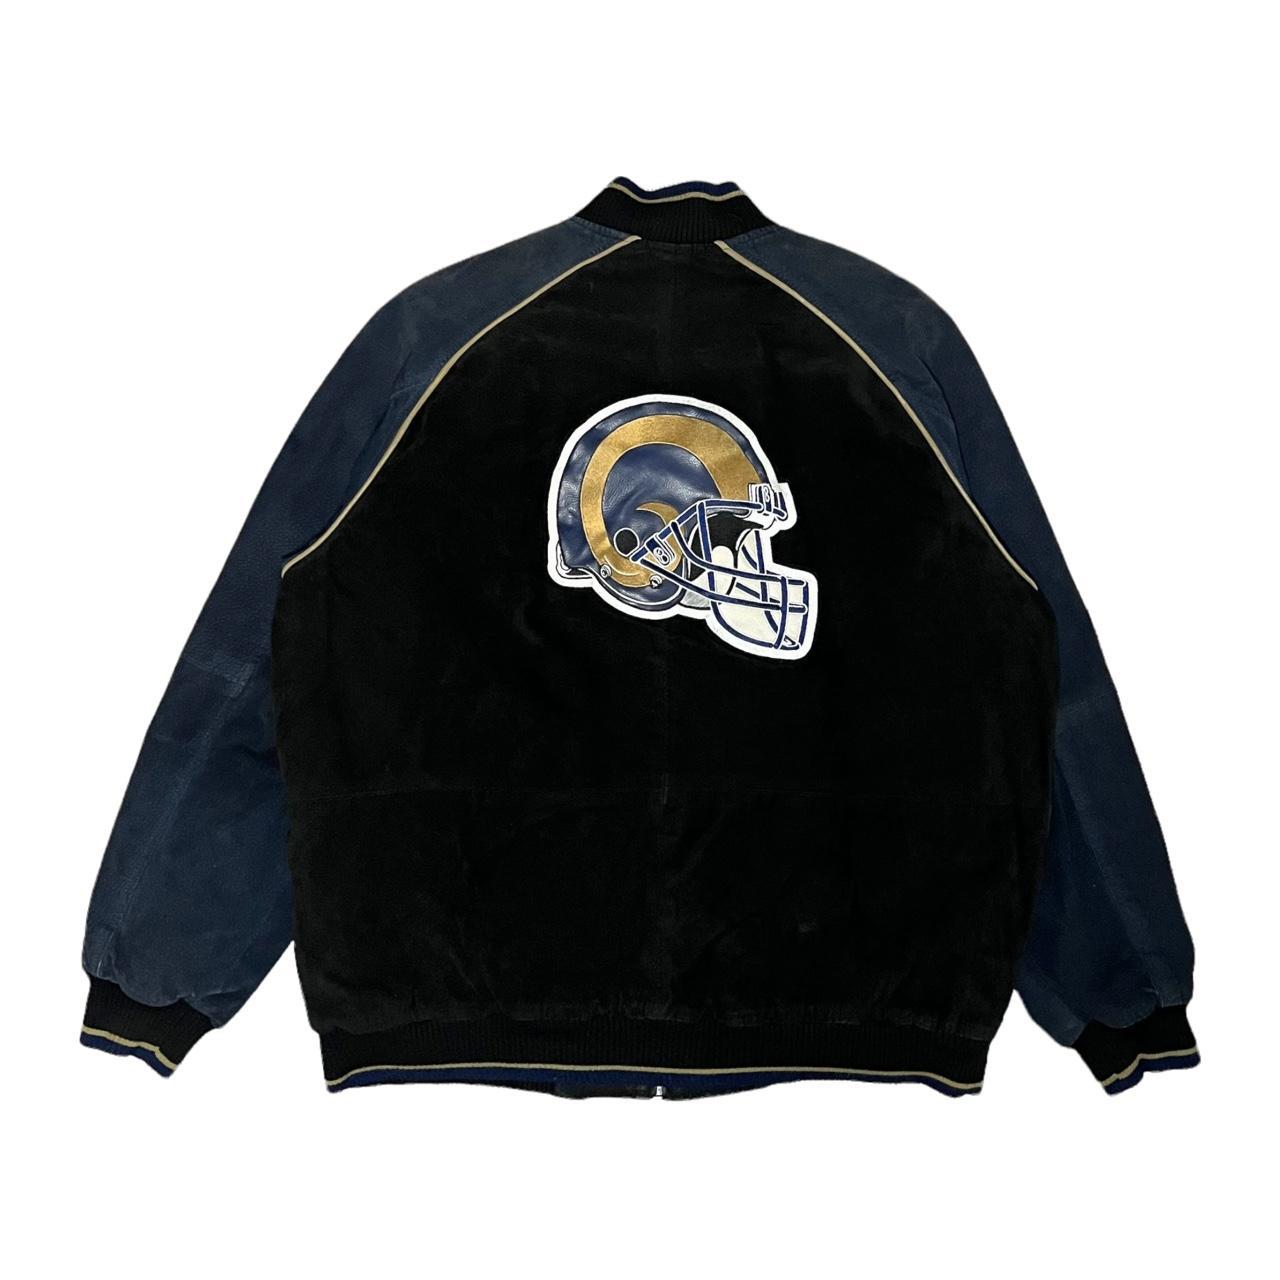 Product Image 2 - Retro Rams Jacket

- Great Condition!
-